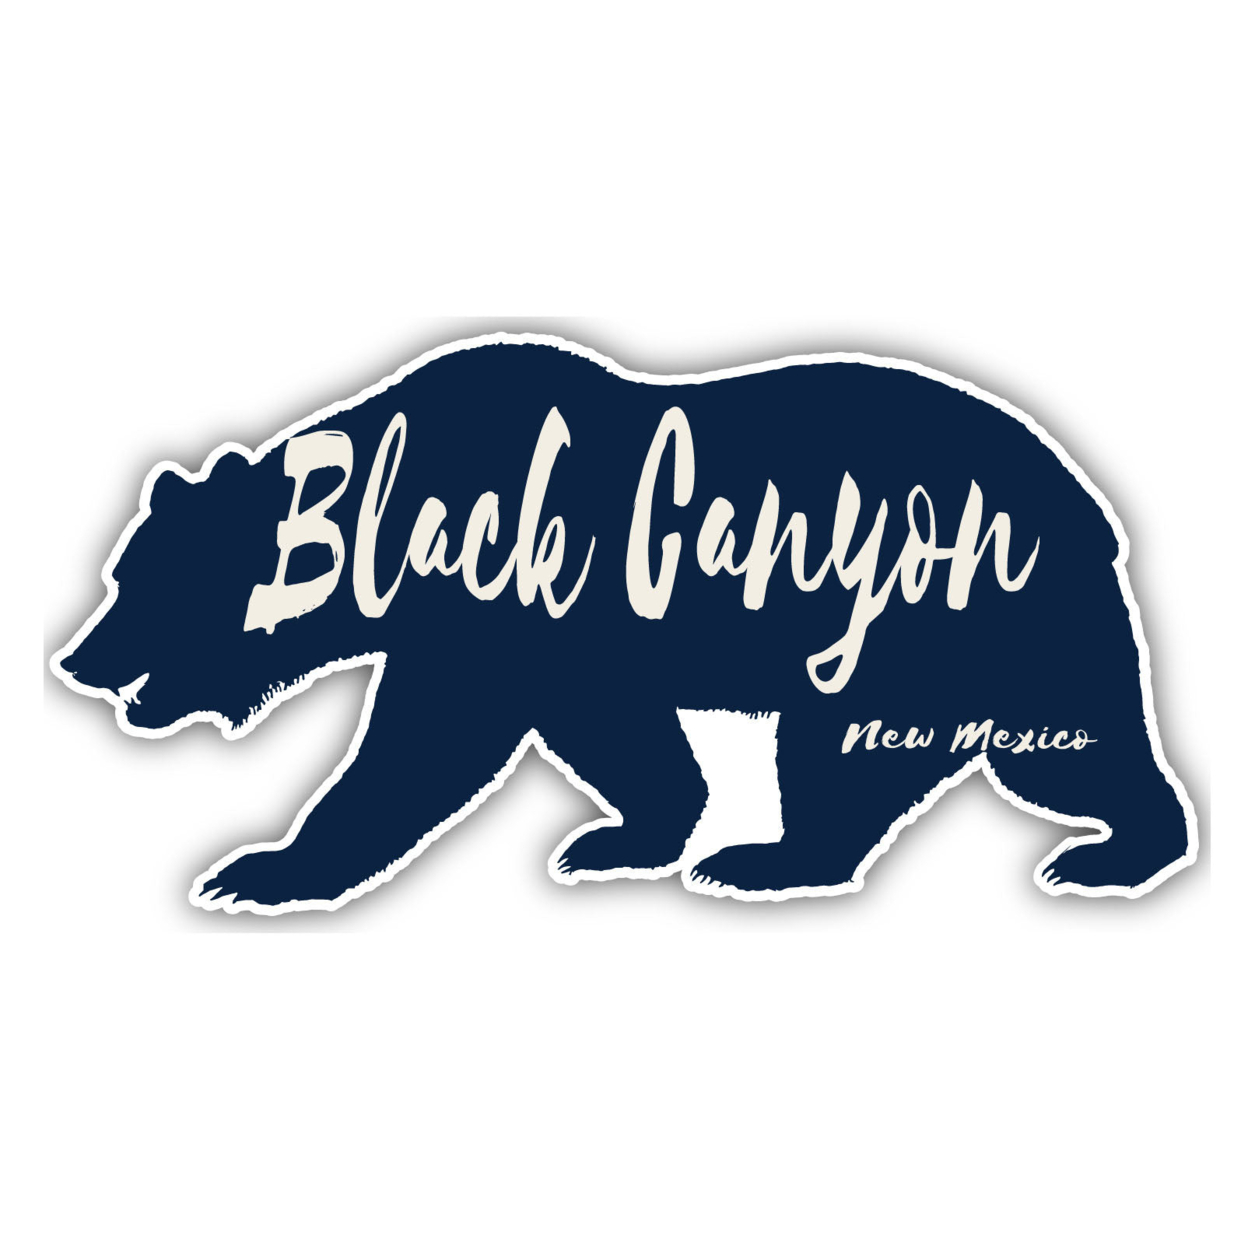 Black Canyon New Mexico Souvenir Decorative Stickers (Choose Theme And Size) - 4-Pack, 6-Inch, Bear